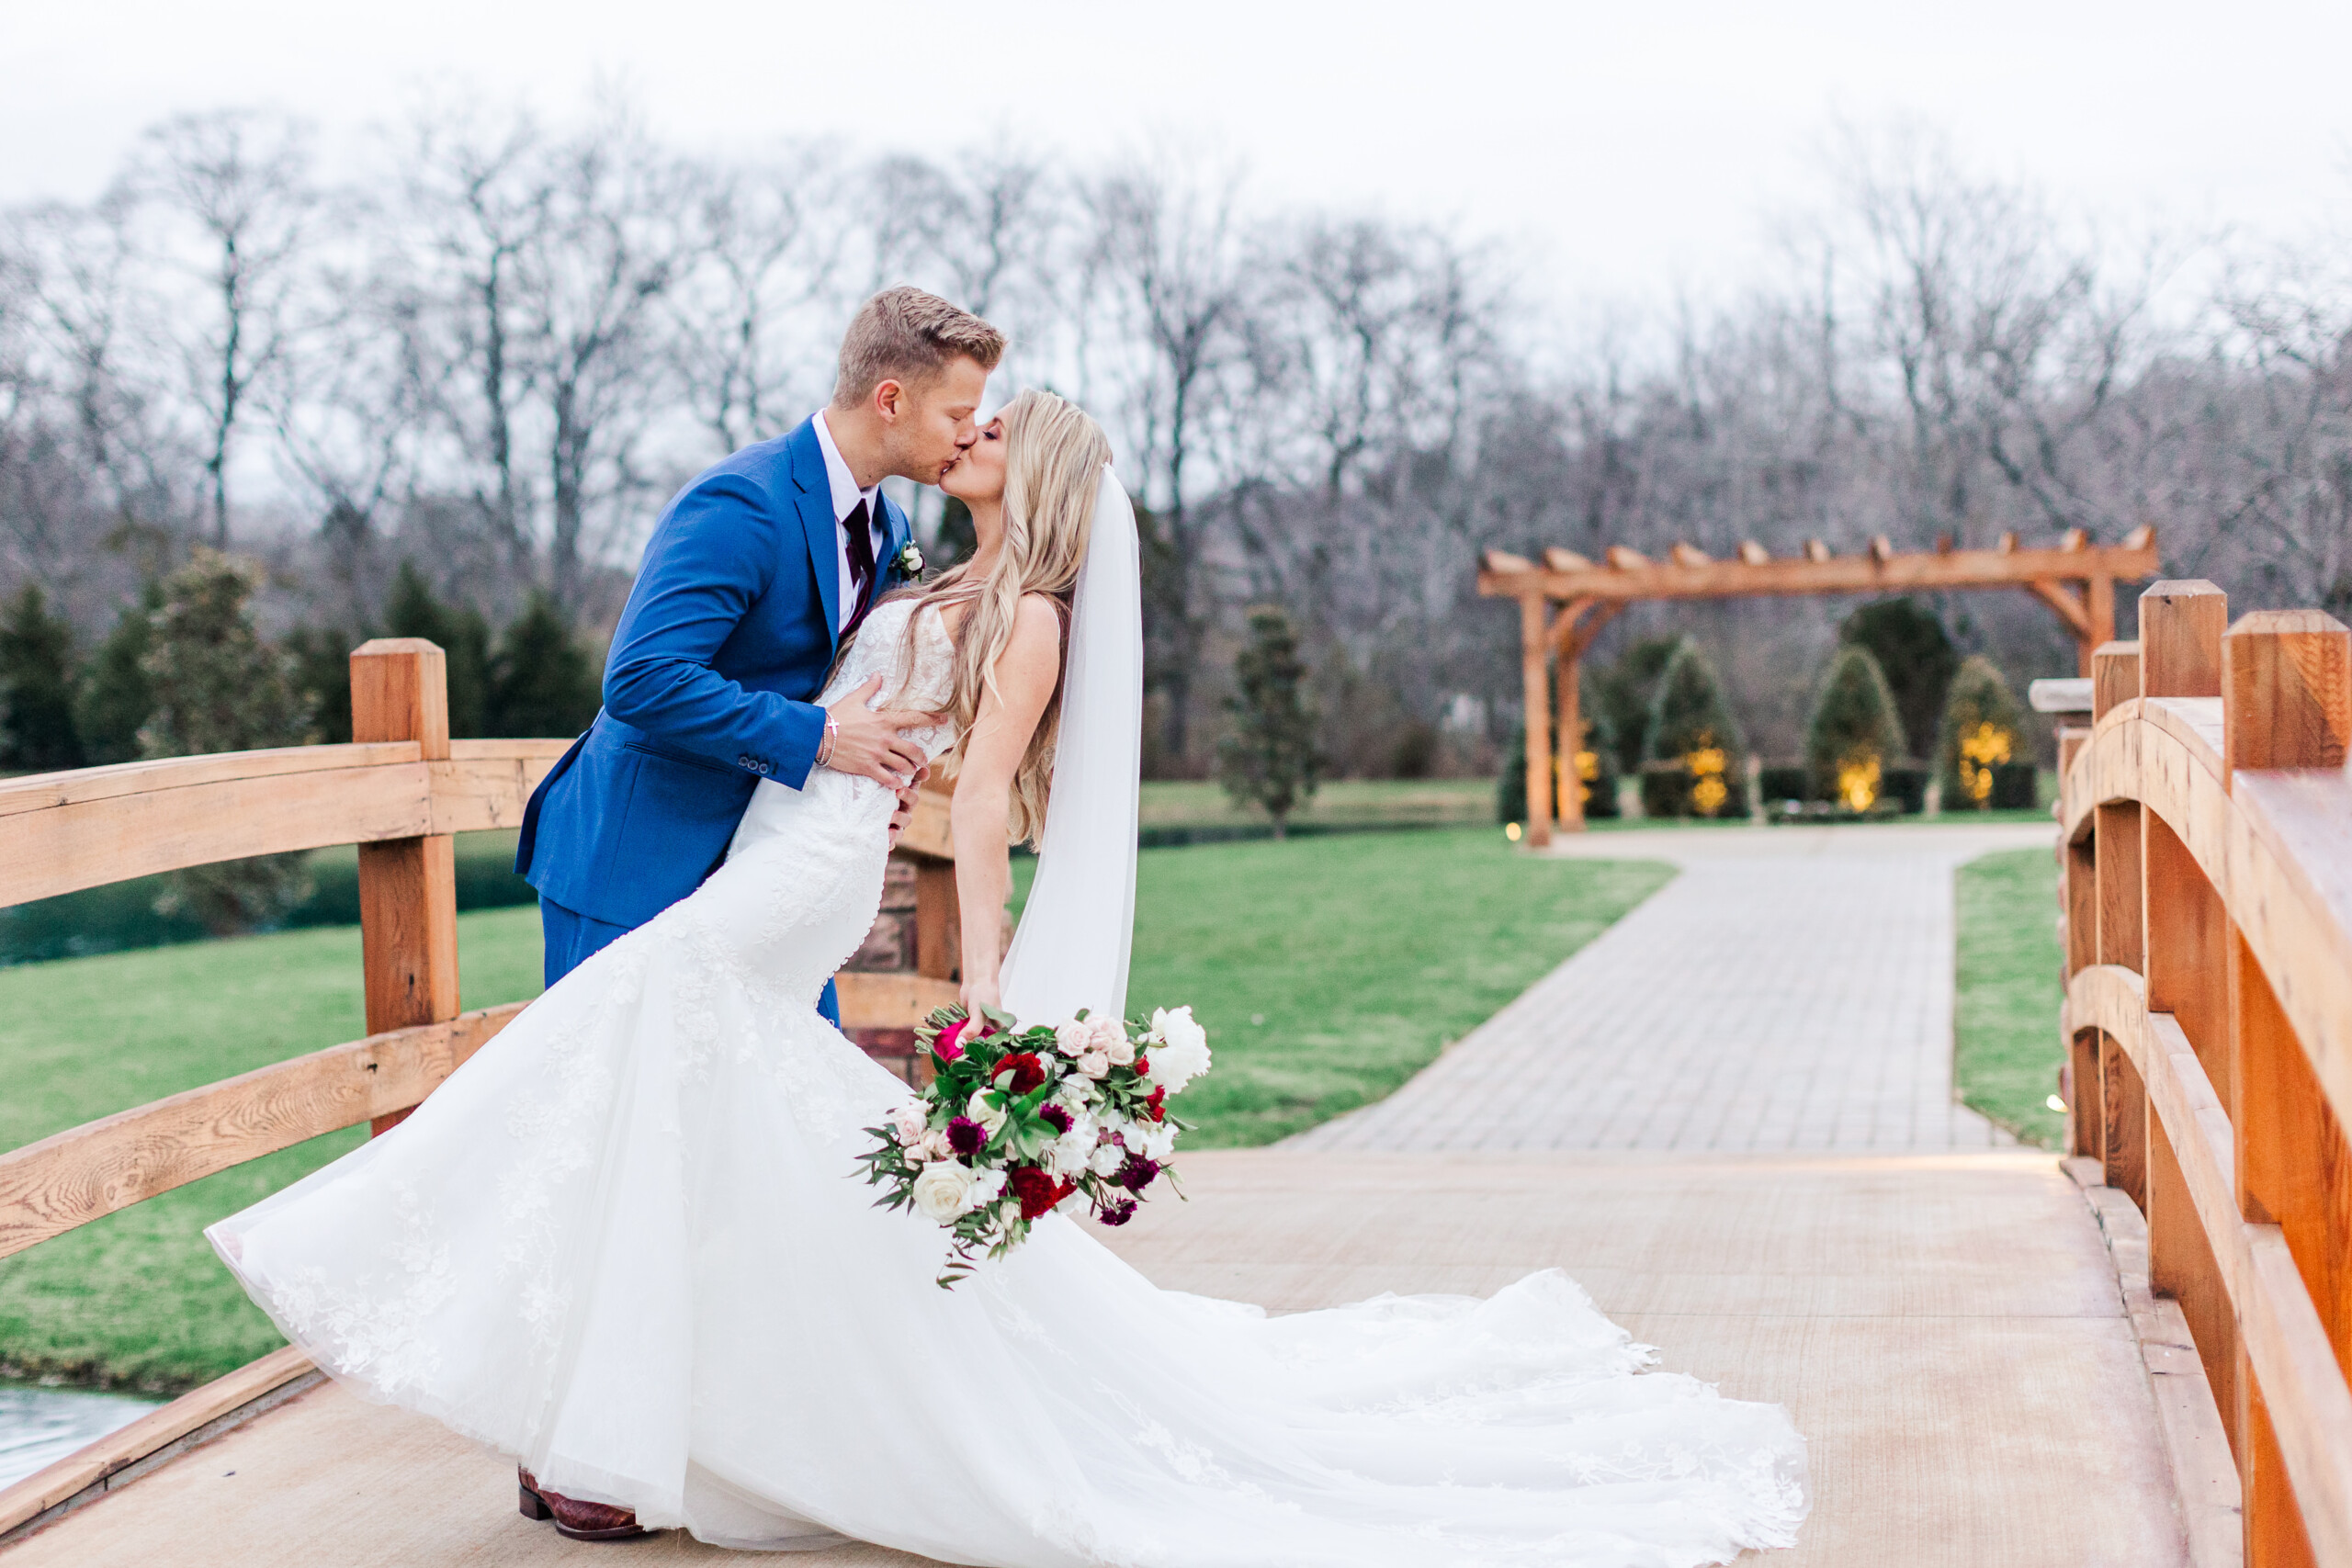 Sycamore Farms Winter Wedding by Amy Allmand Photography